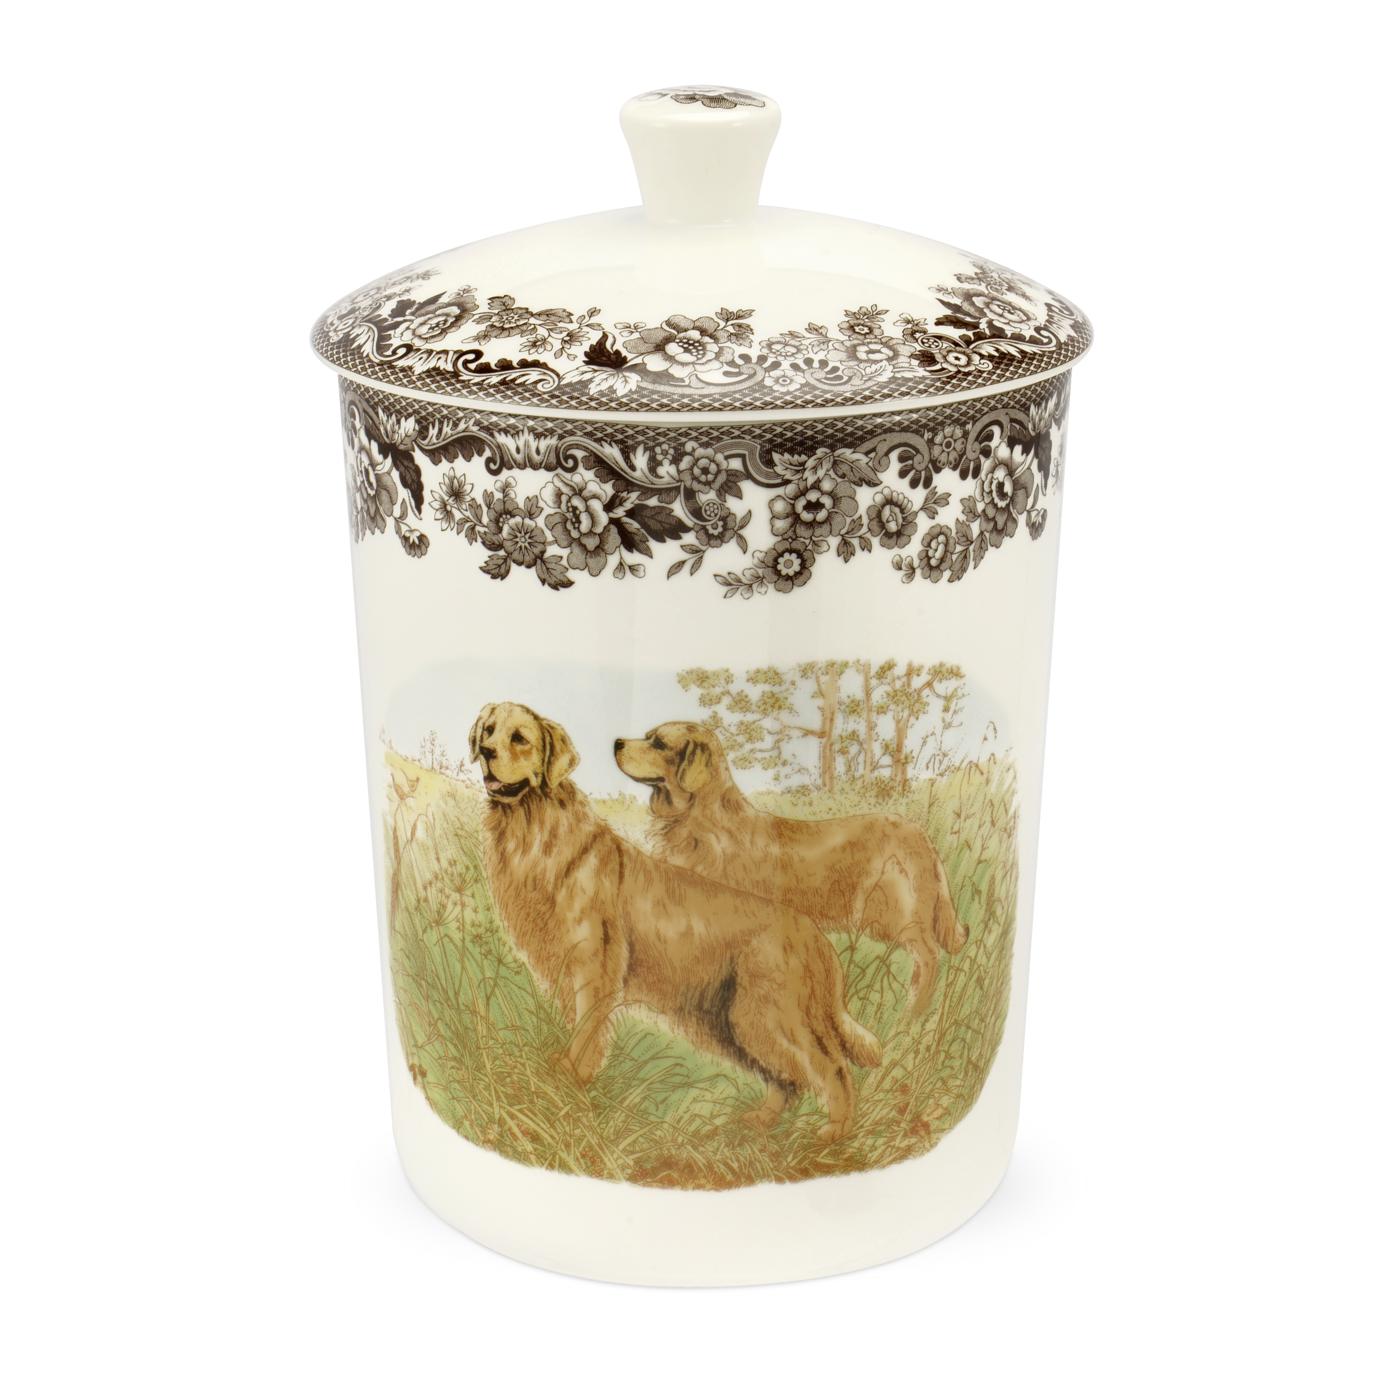 Woodland Medium Canister 8 Inch, Golden Retriever image number null